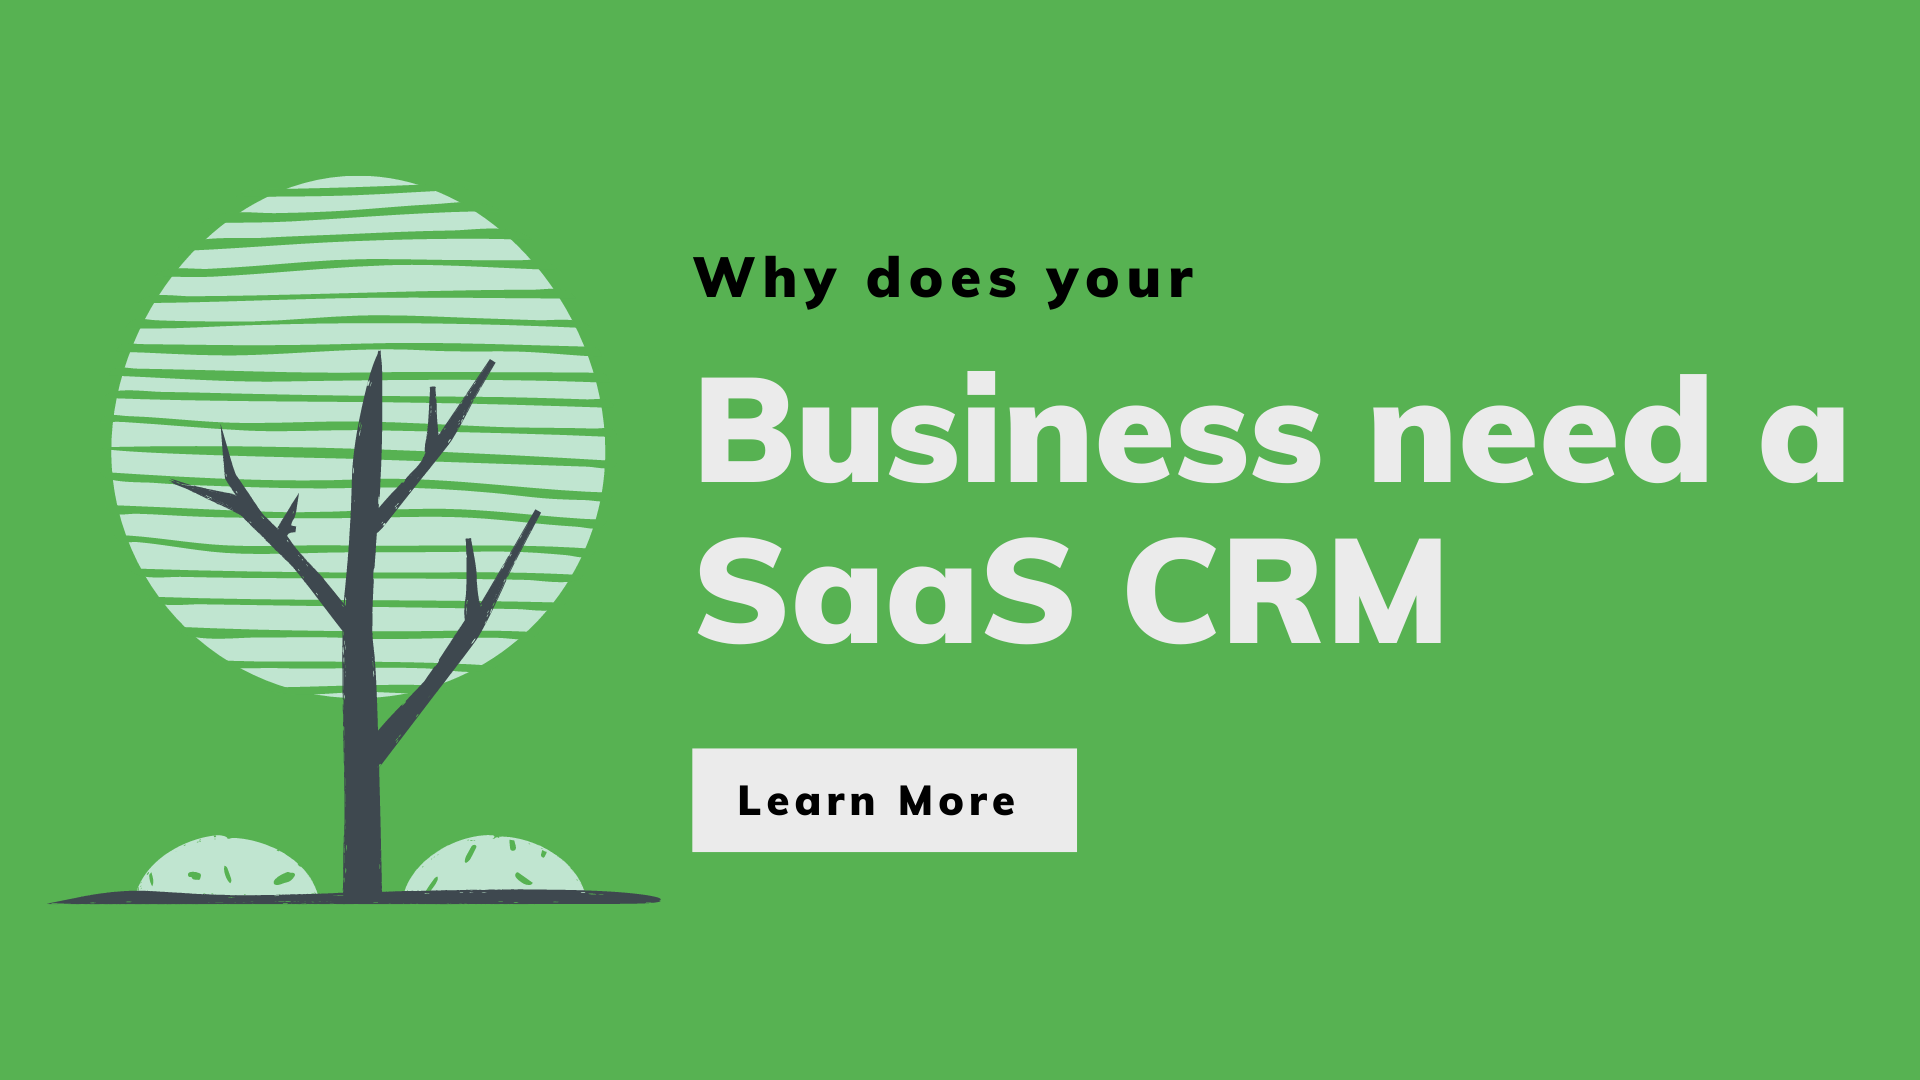 Why does your business need a SaaS CRM?